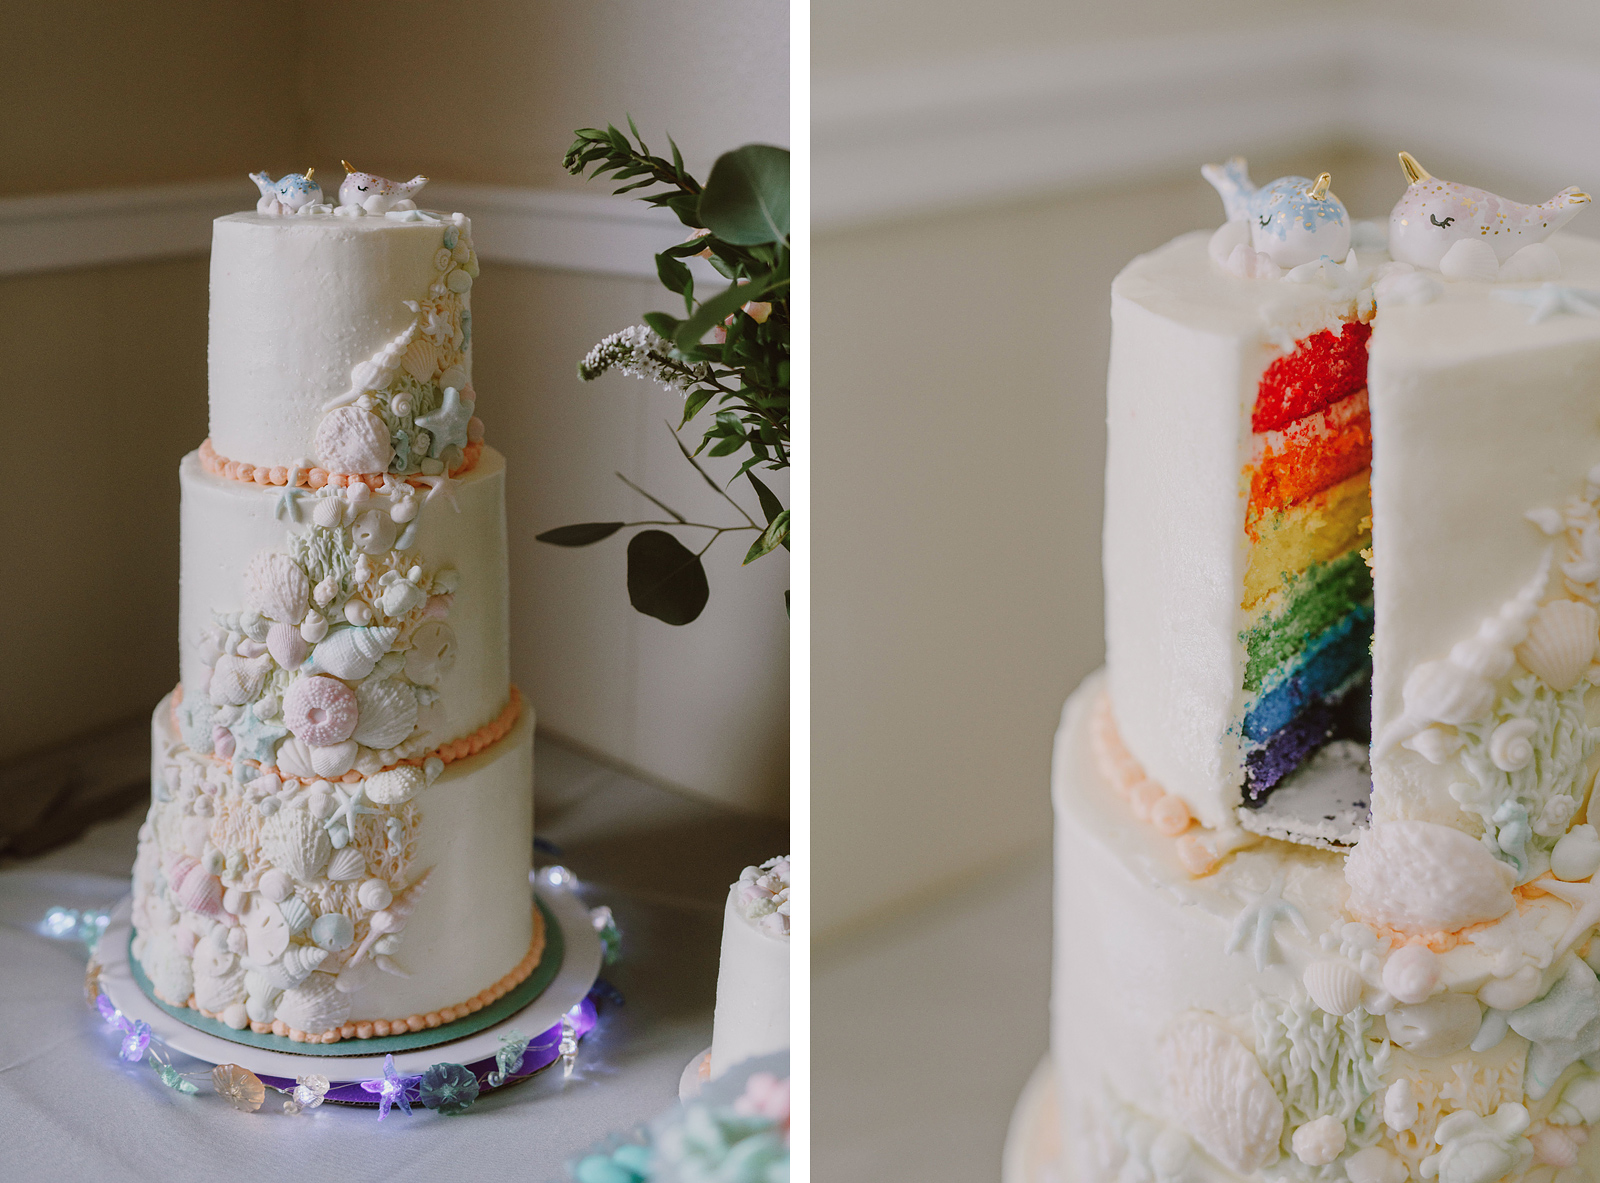 Detail photos of a 3 tiered cake decorated with seashells, revealing rainbow colored layers on the inside - Oceanside Community Club Wedding on the Oregon Coast” title=